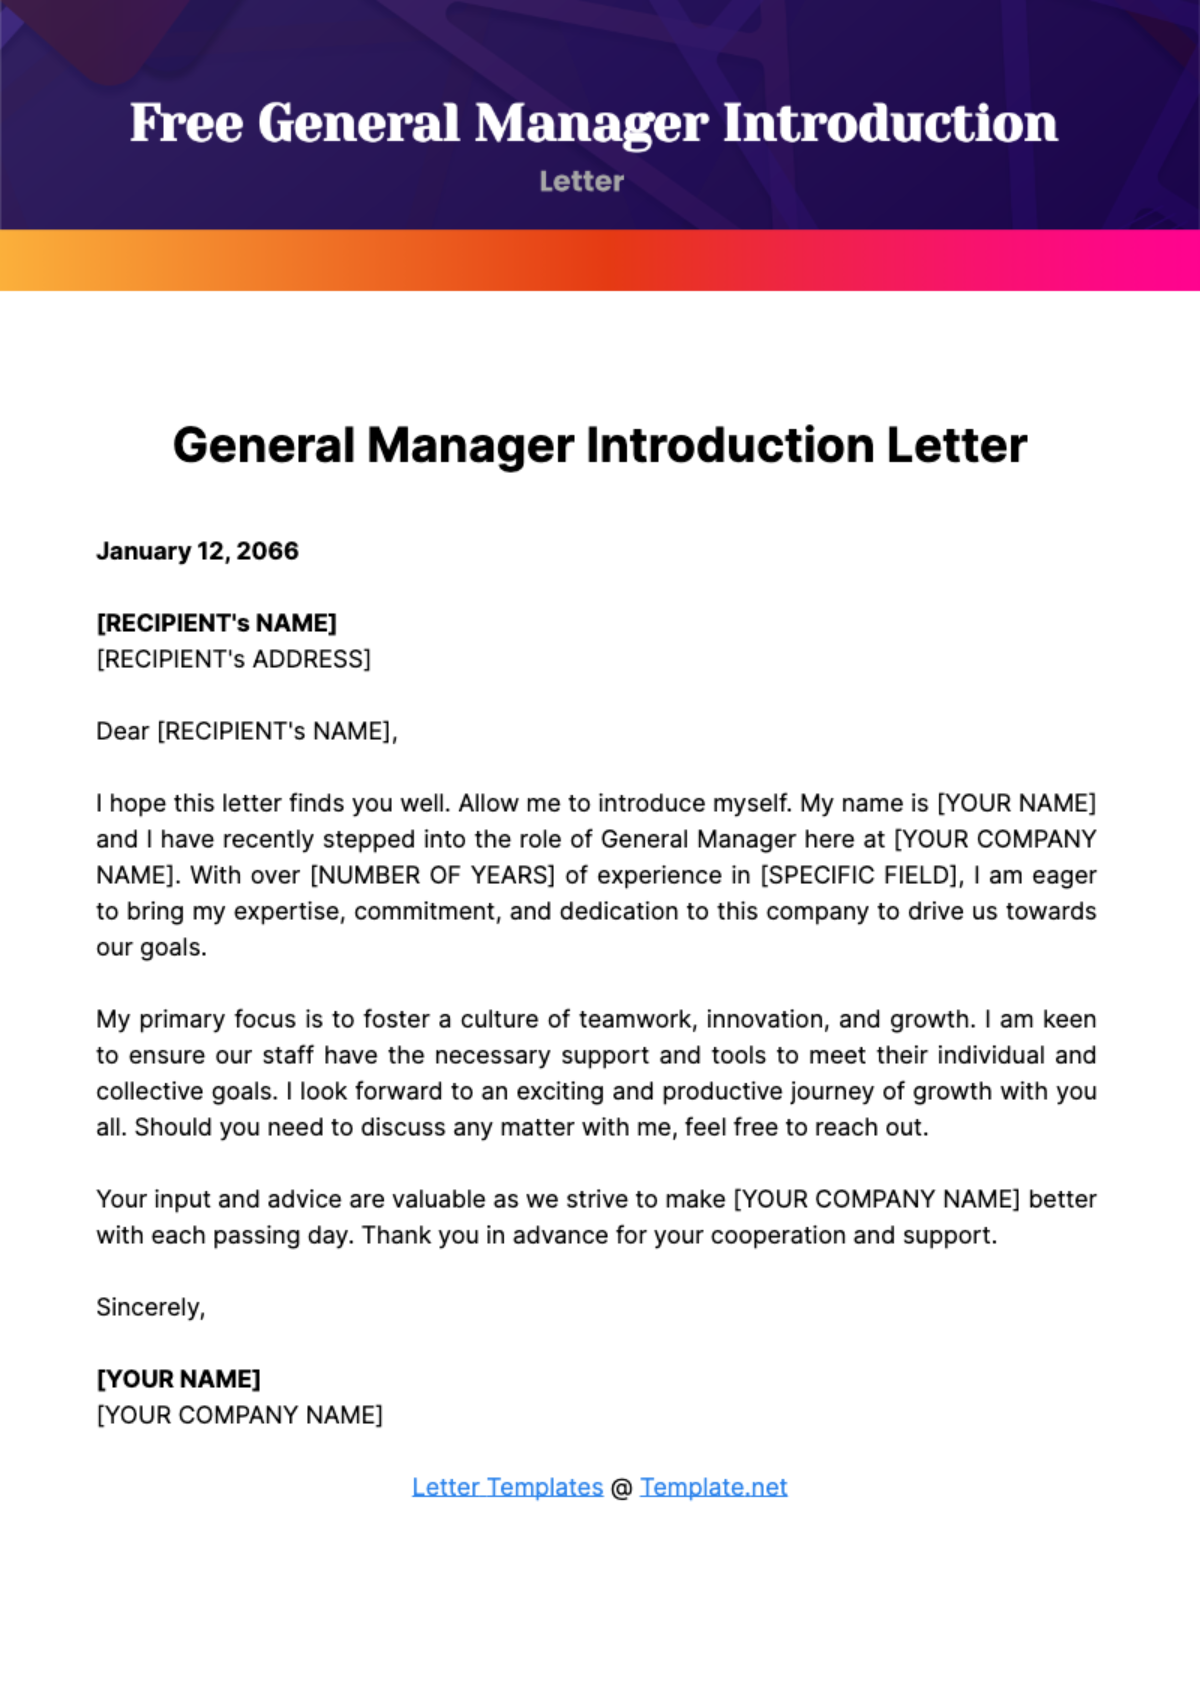 Free General Manager Introduction Letter Template